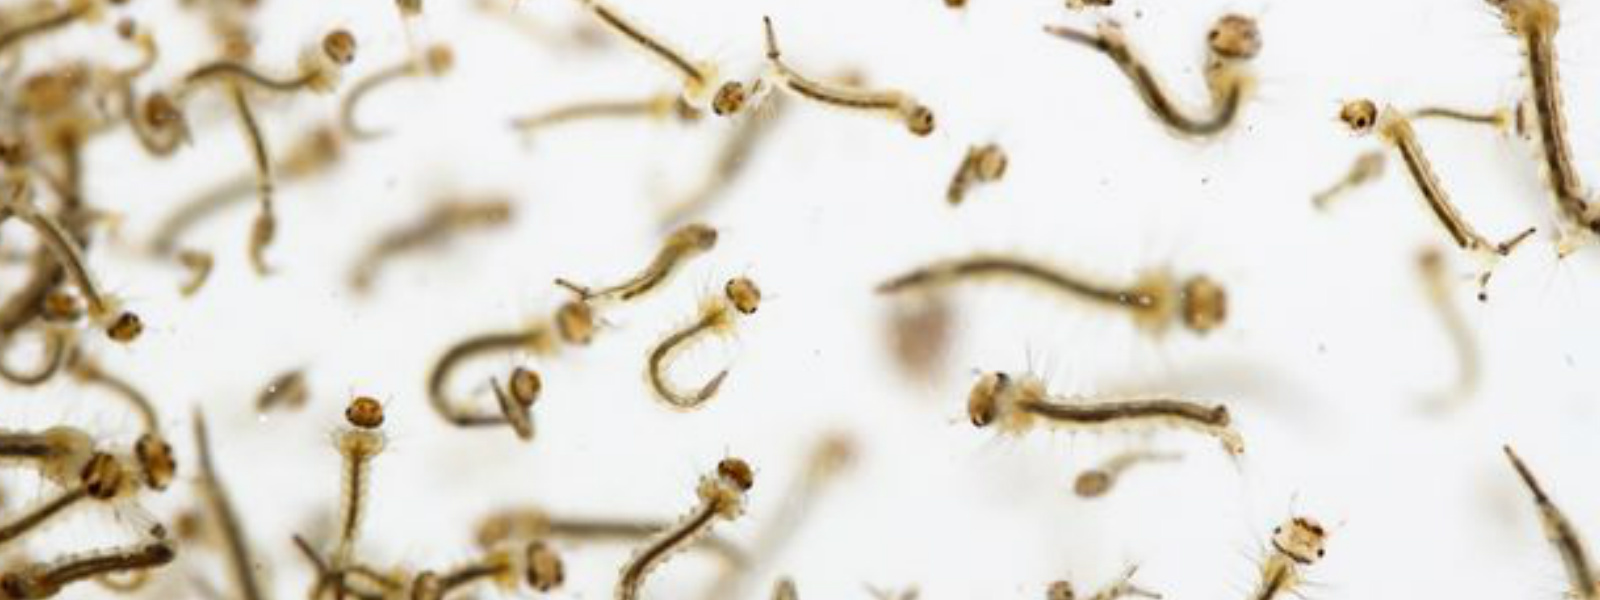 Rapid rise in the density of mosquito larvae